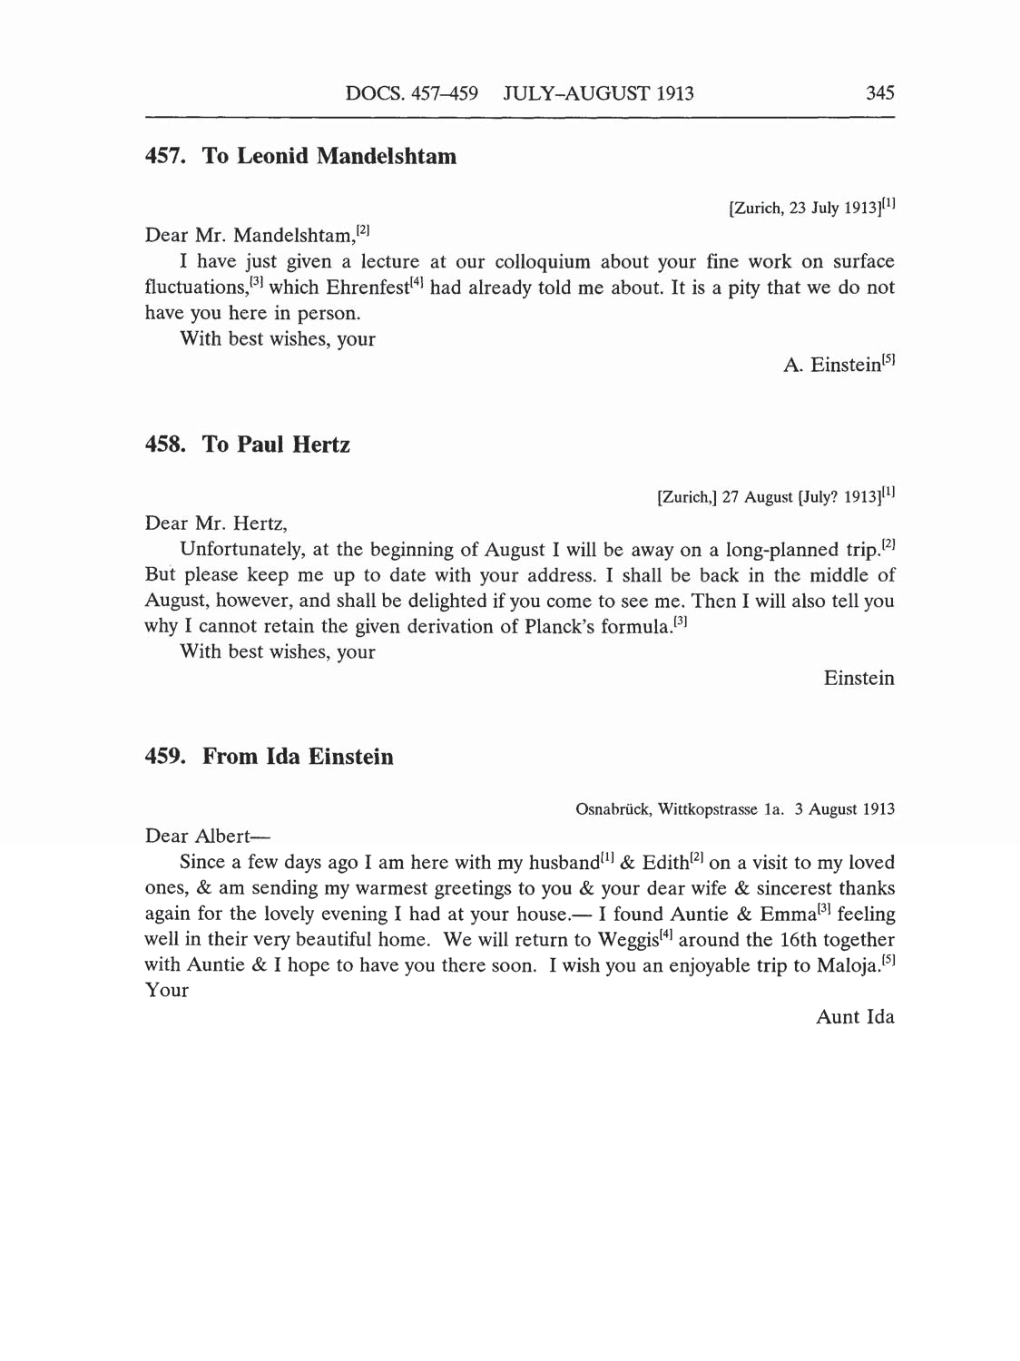 Volume 5: The Swiss Years: Correspondence, 1902-1914 (English translation supplement) page 345